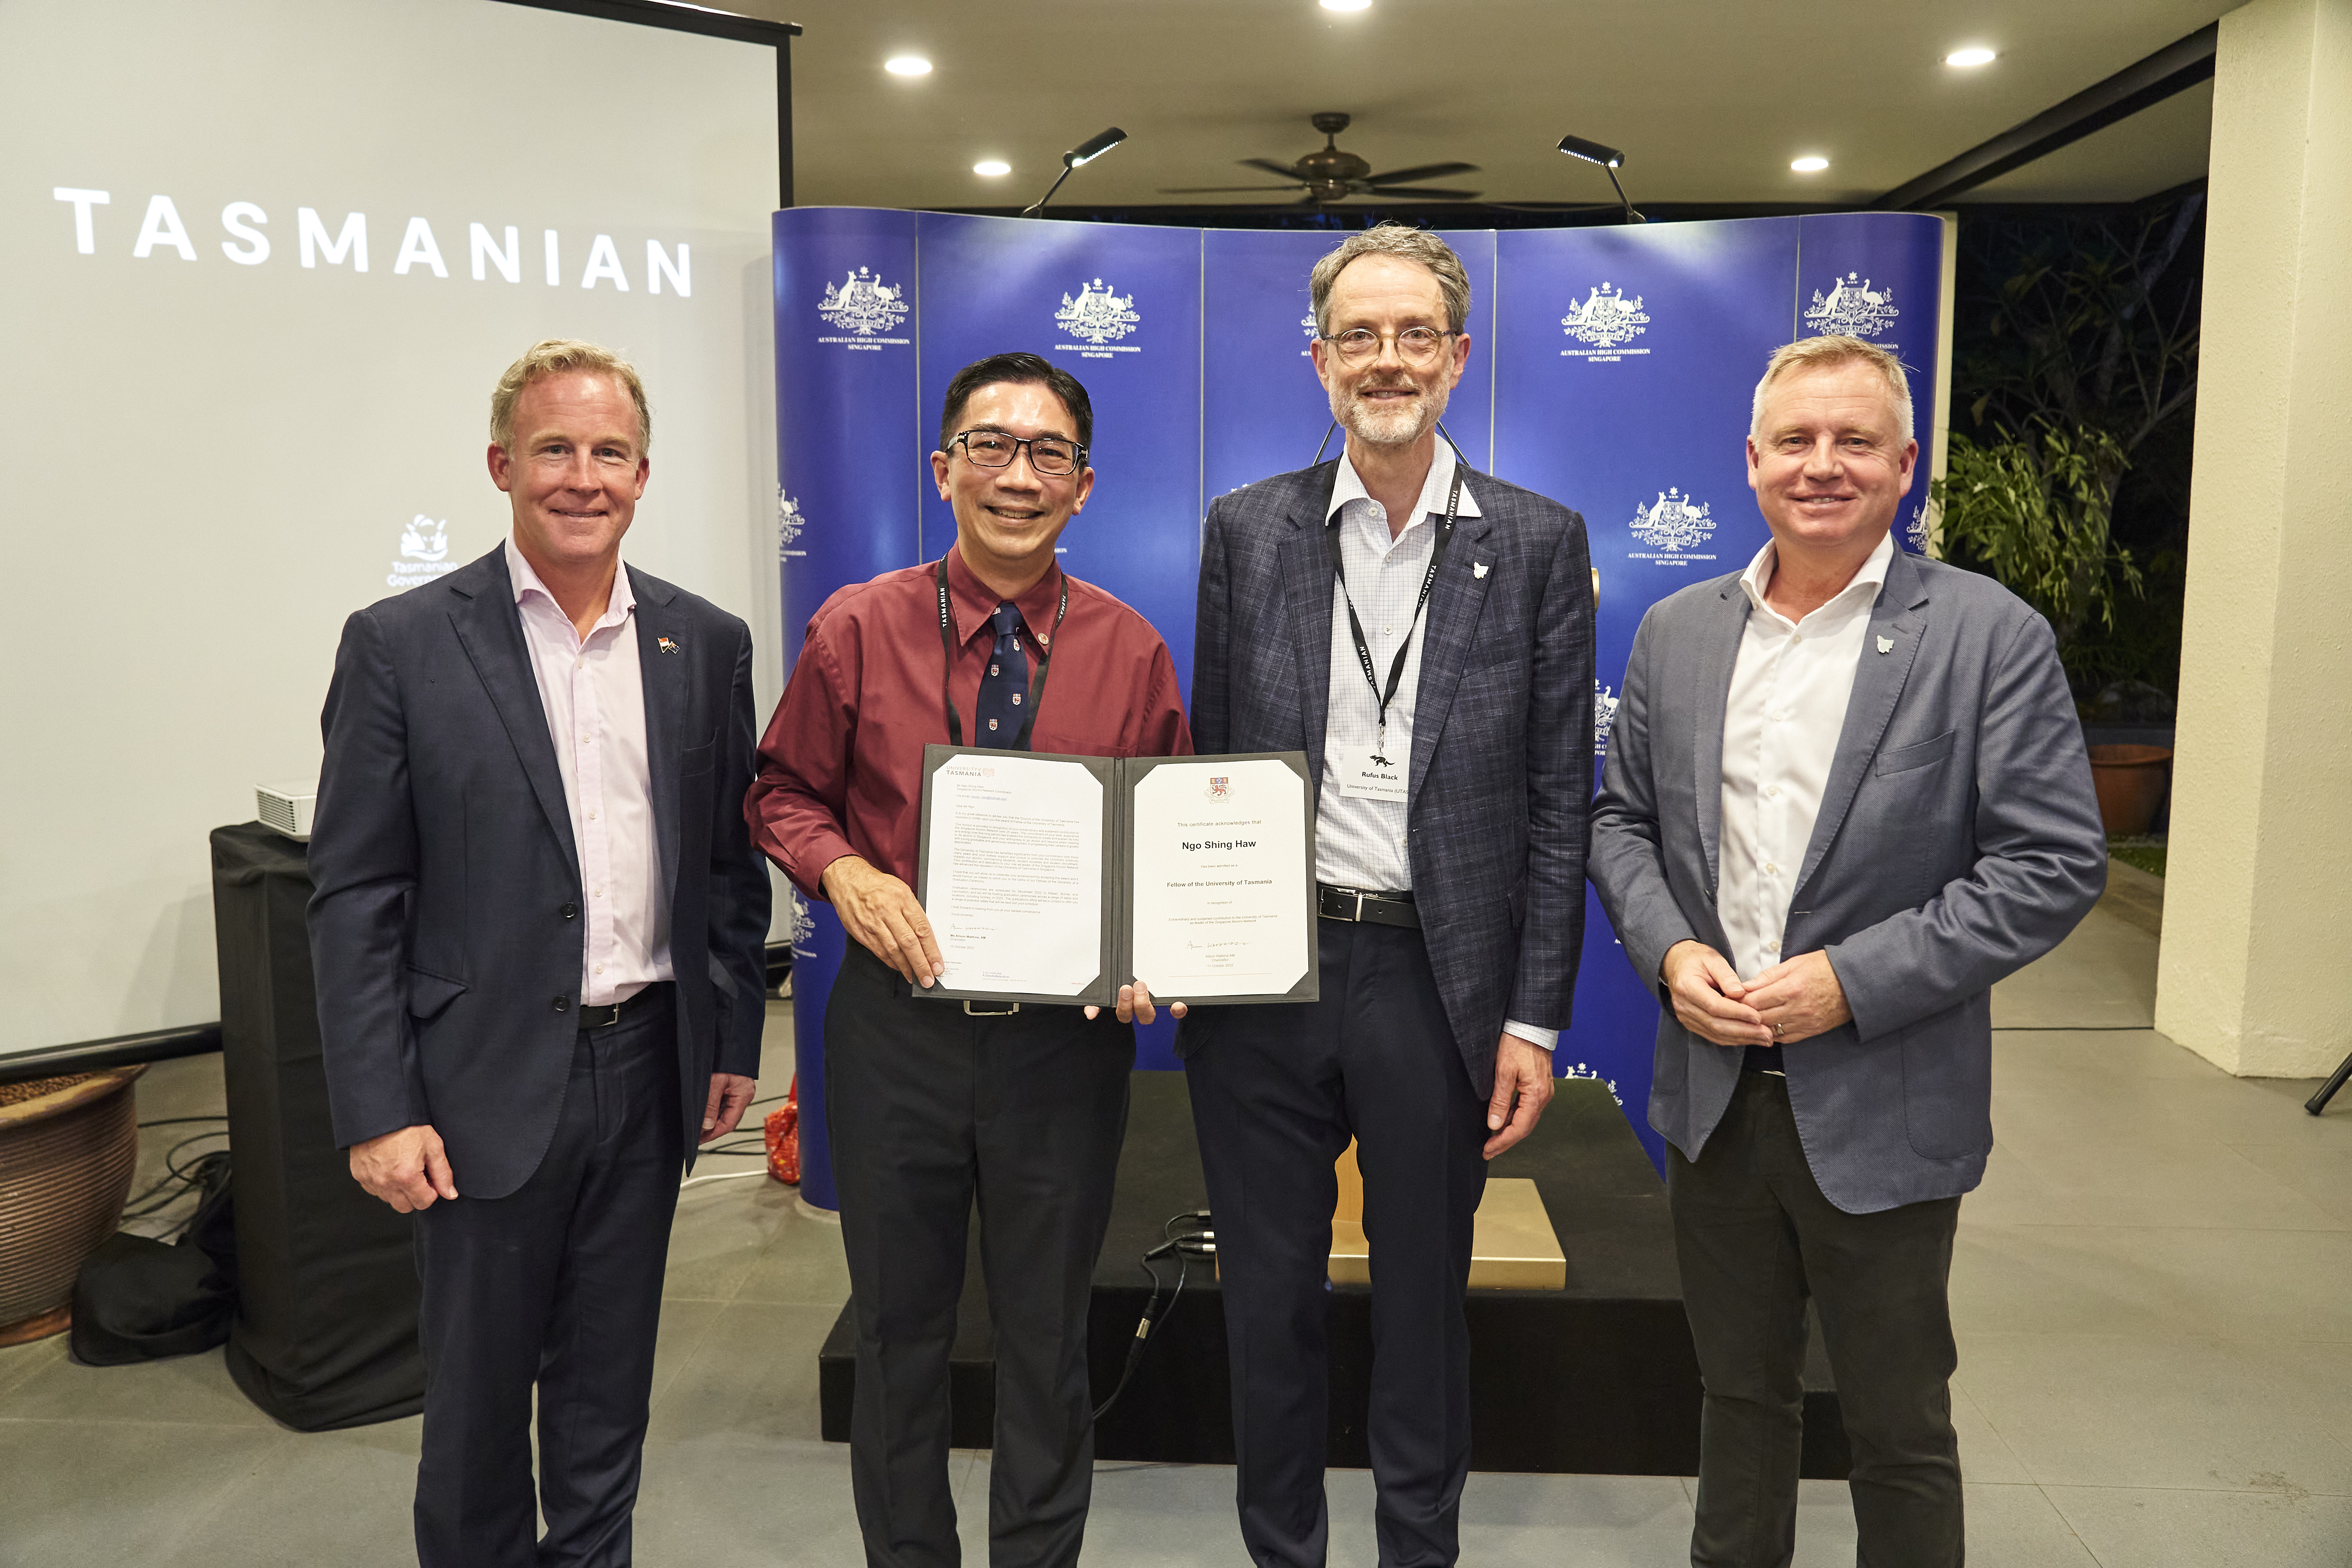 From left: The Hon Will Hodgman, Australian High Commissioner to Singapore; Richard Ngo; Professor Rufus Black, Vice-Chancellor; and The Hon Jeremy Rockliff, Premier of Tasmania, in Singapore at Richard’s appointment as a Fellow of the University.